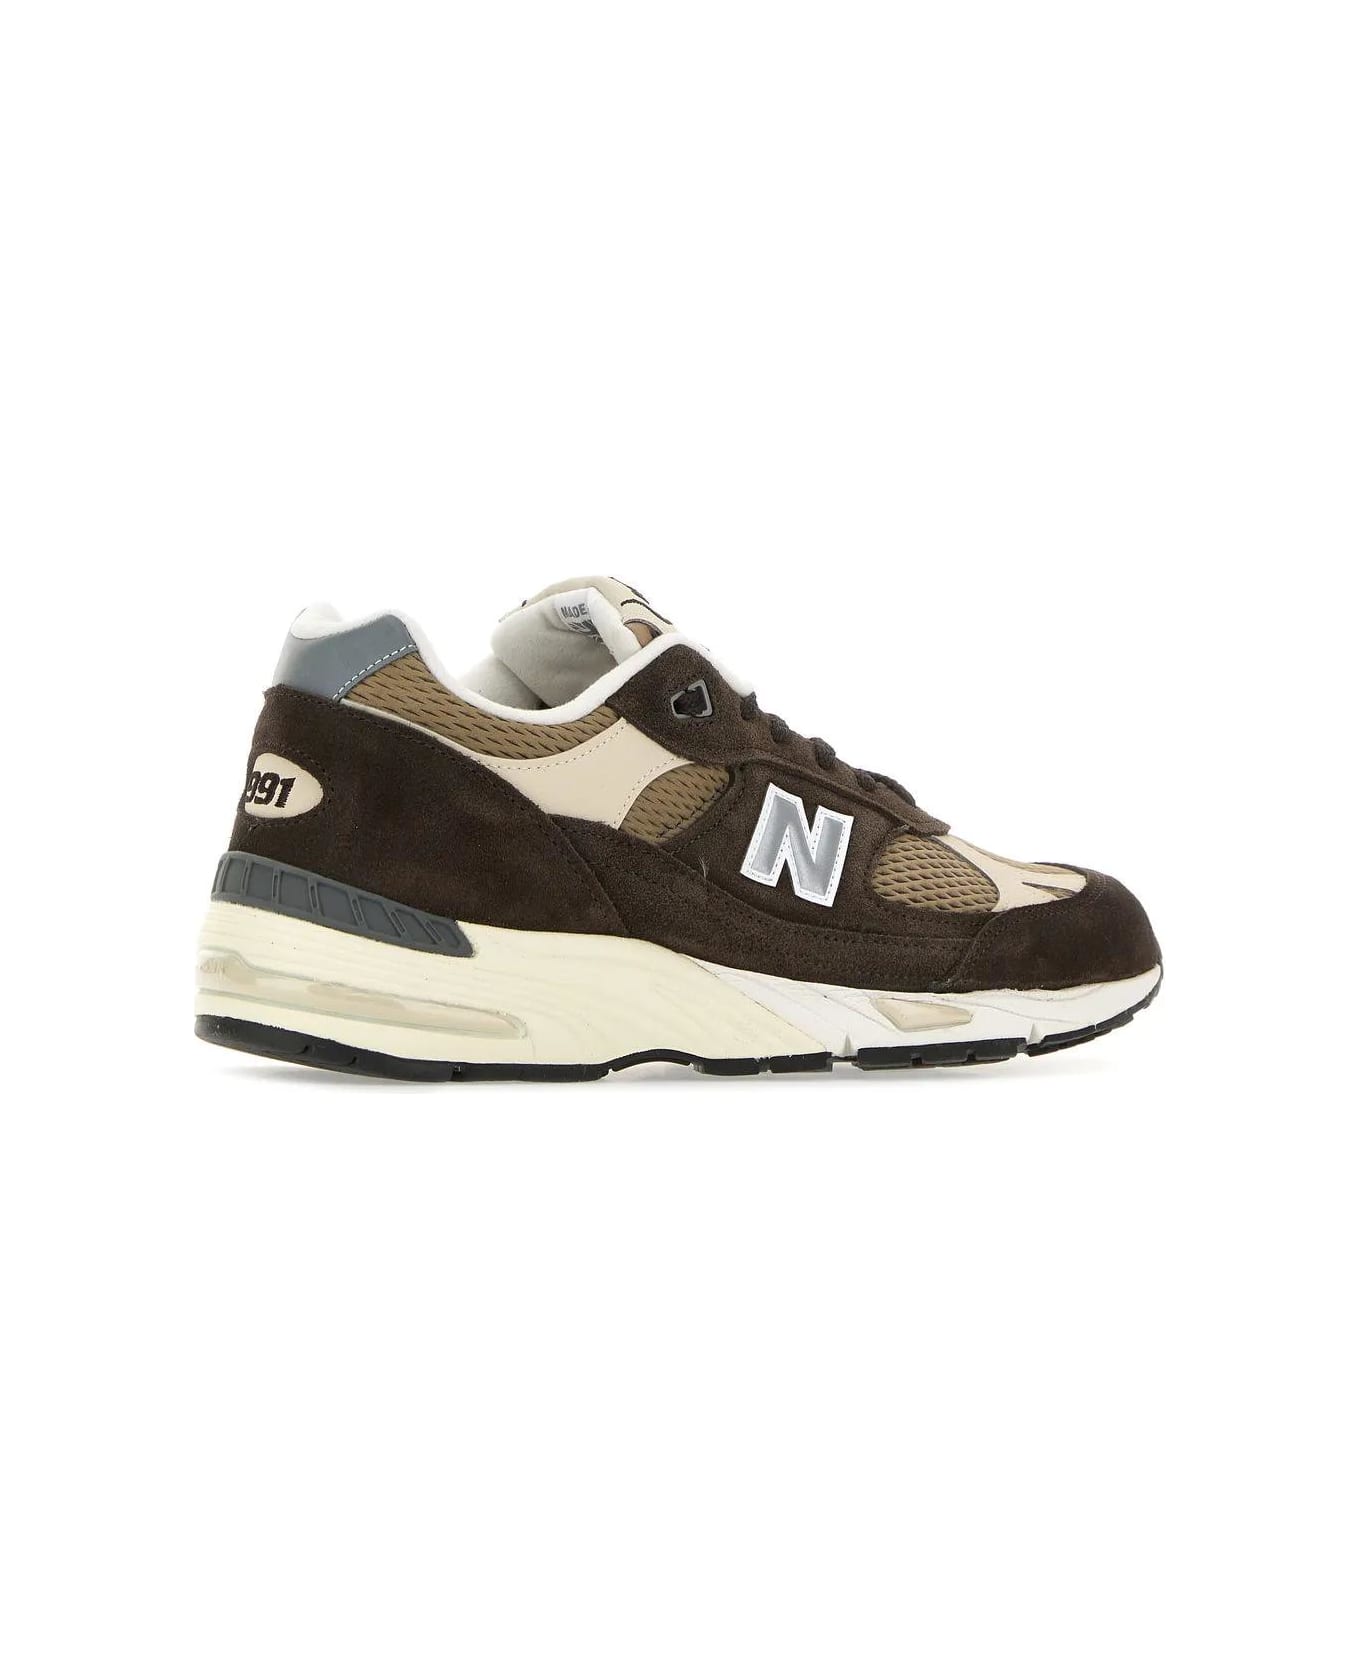 New Balance Brown Suede And Mesh 991v1 Sneakers - BROWN/NEUTRALS スニーカー